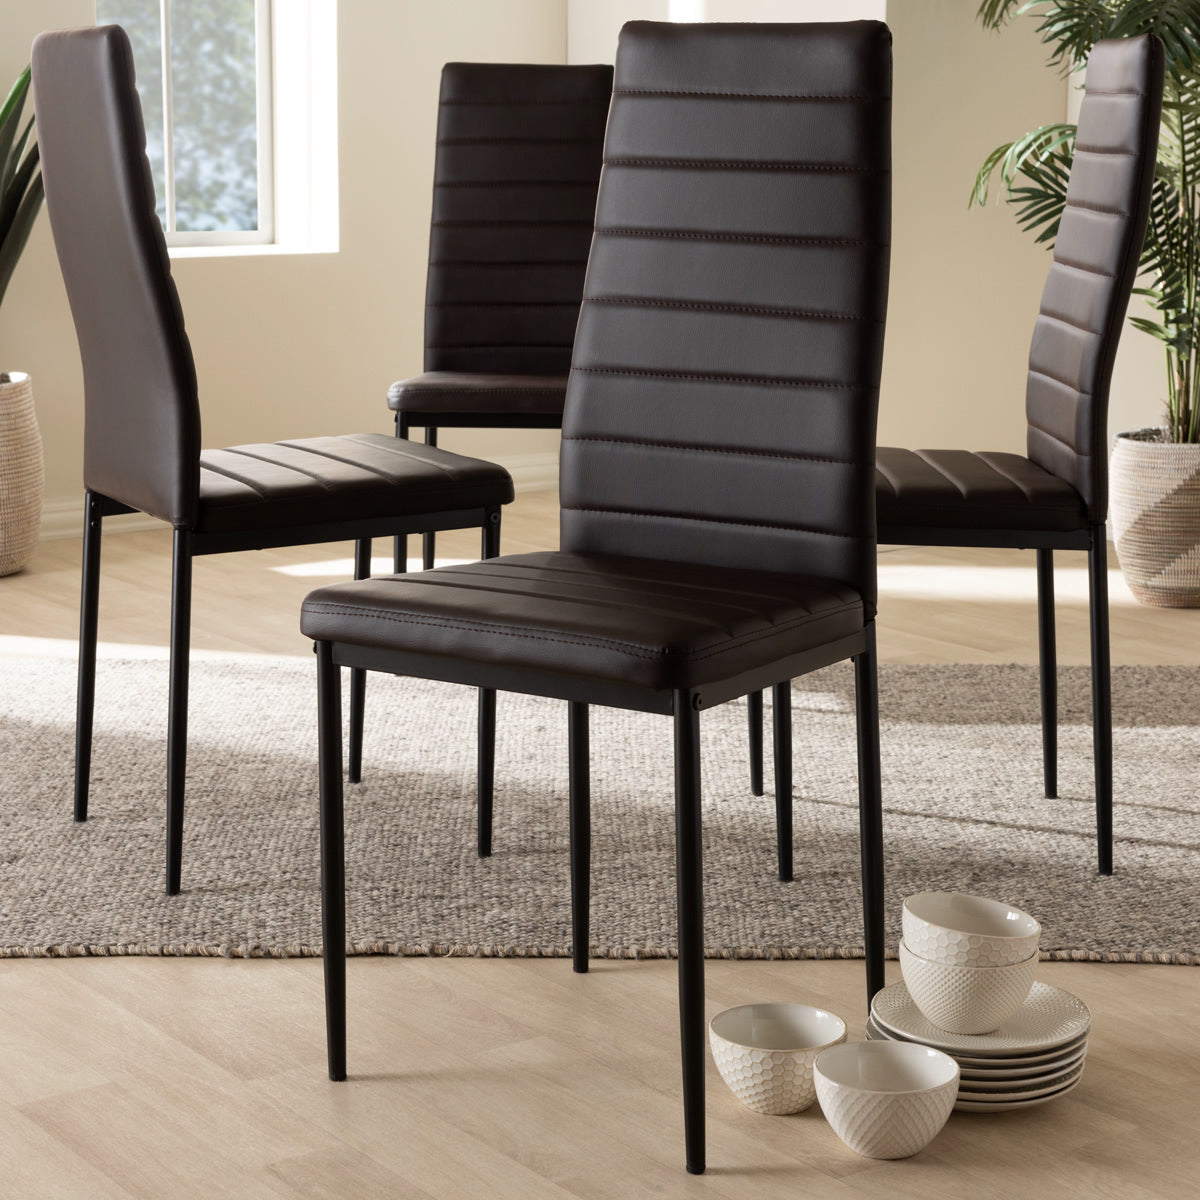 Baxton Studio Armand Modern and Contemporary Brown Faux Leather Upholstered Dining Chair (Set of 4) Baxton Studio-dining chair-Minimal And Modern - 3